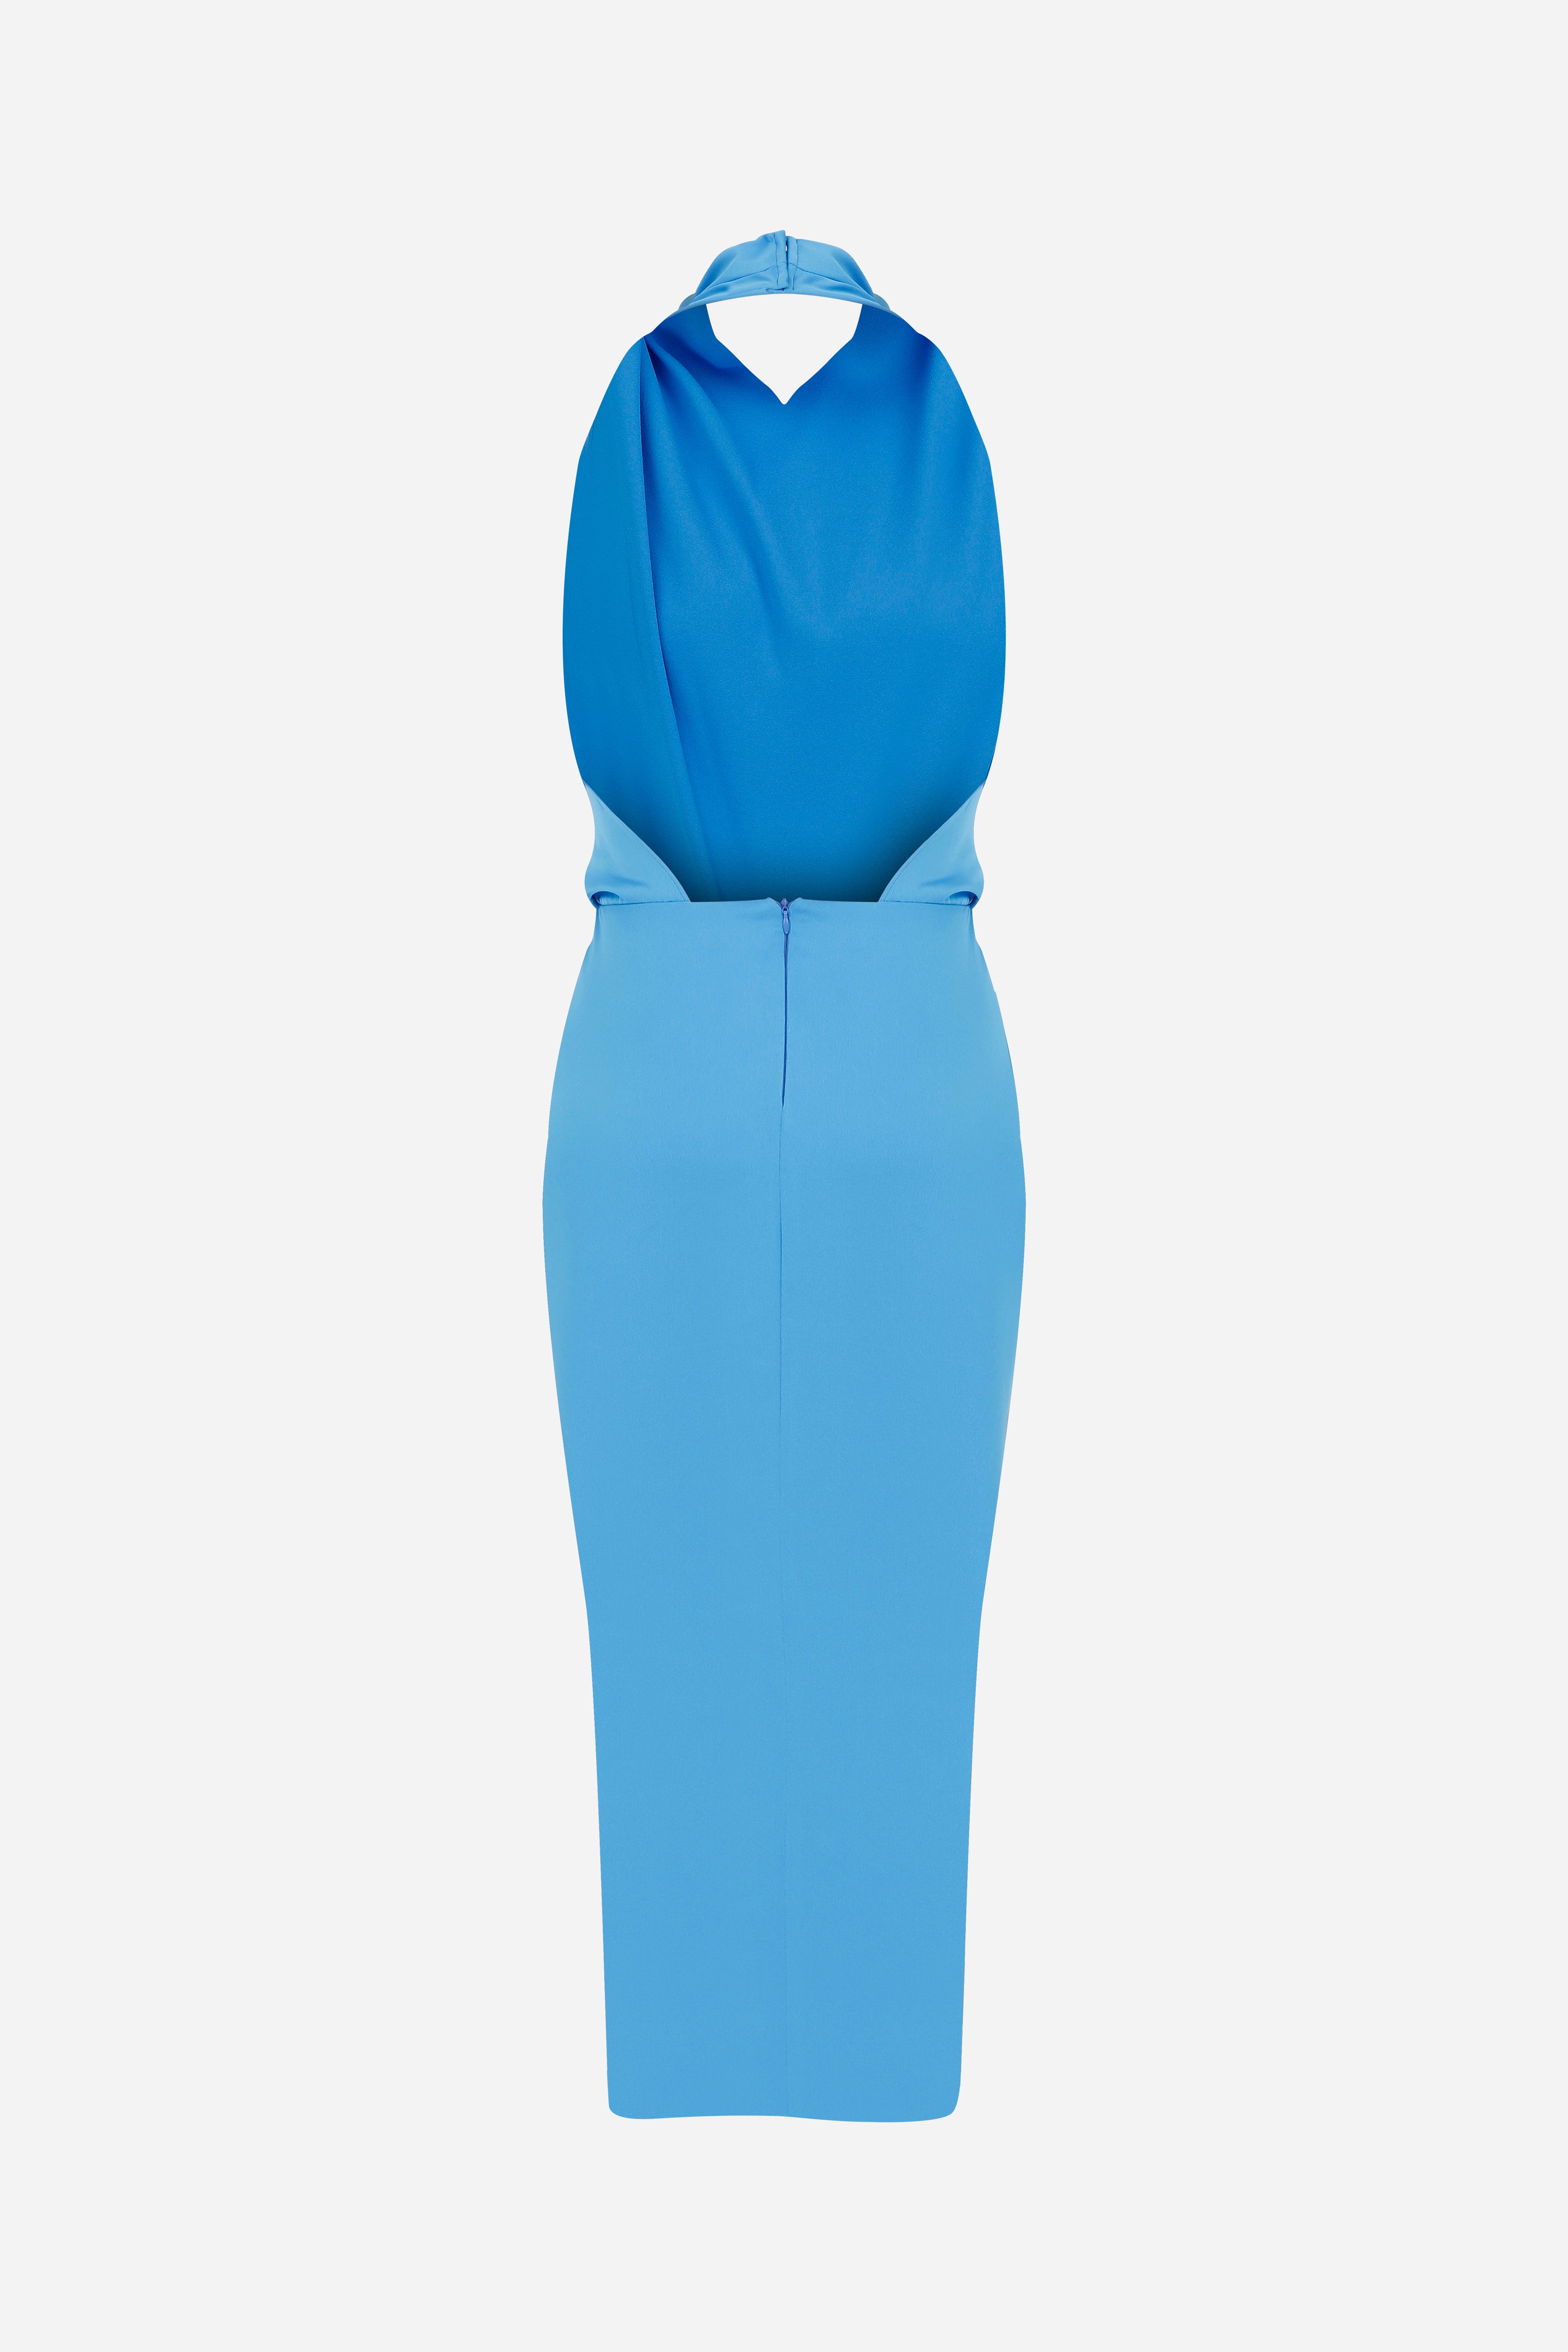 ARIES - SATIN MIDI DRESS WITH OPEN BACK in blue